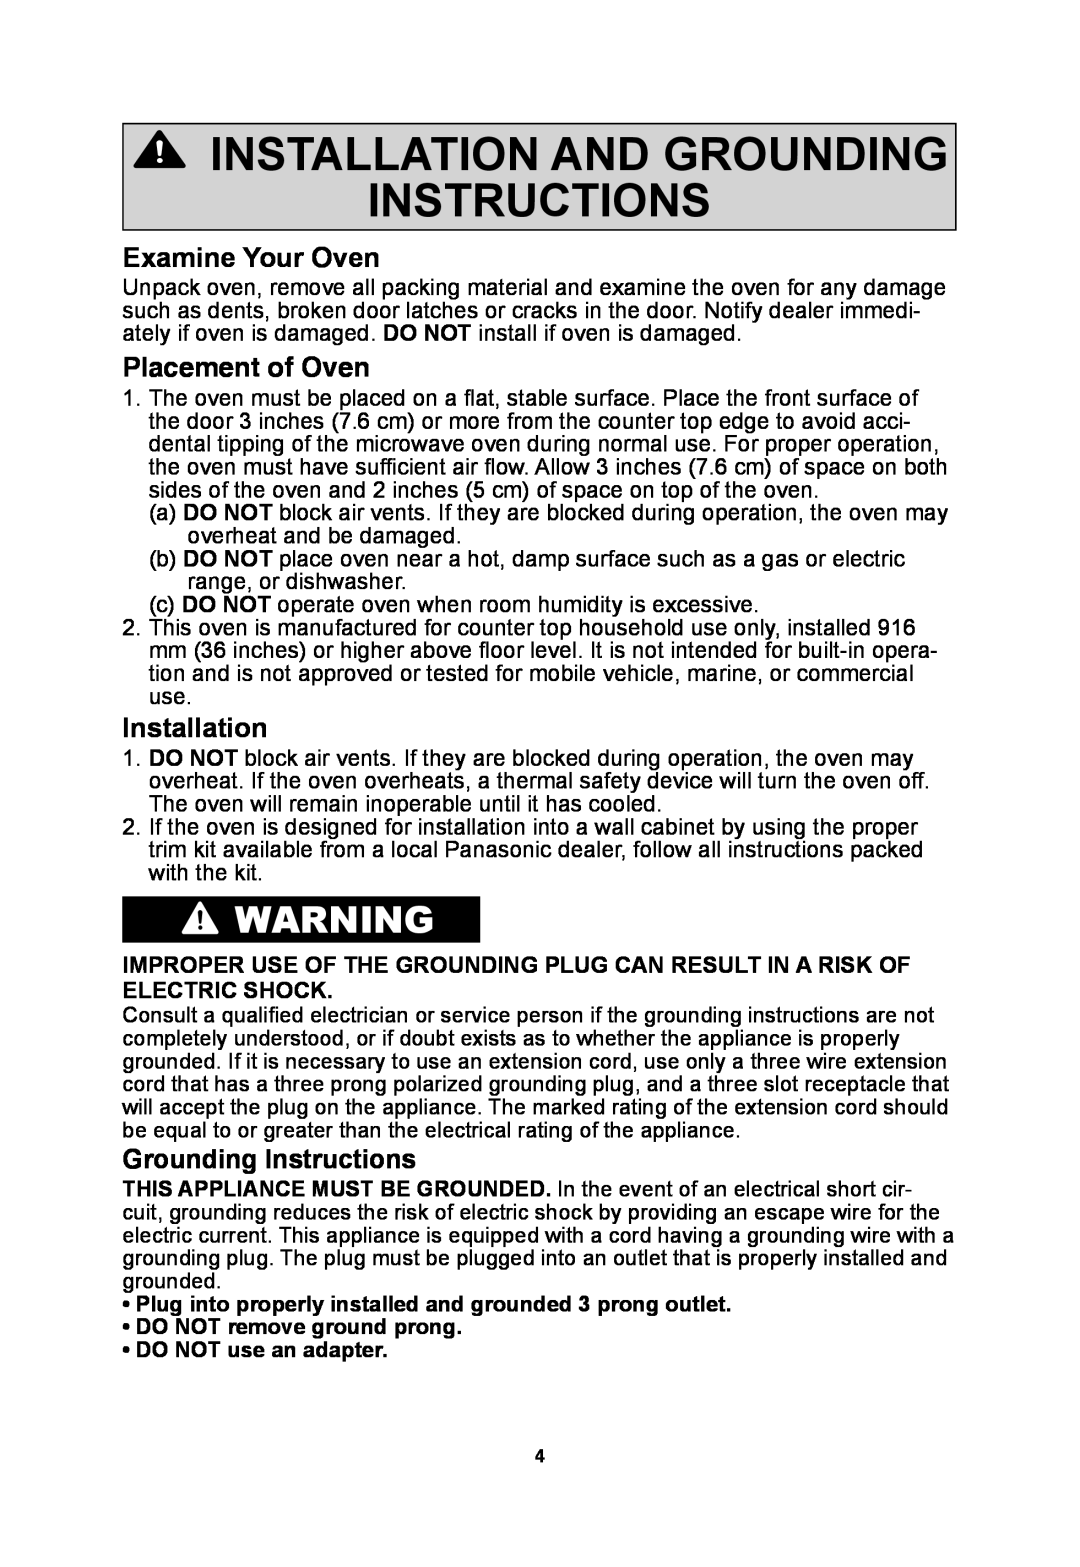 Panasonic NNSN773S Installation And Grounding Instructions, Examine Your Oven, Placement of Oven, •DO NOT use an adapter 